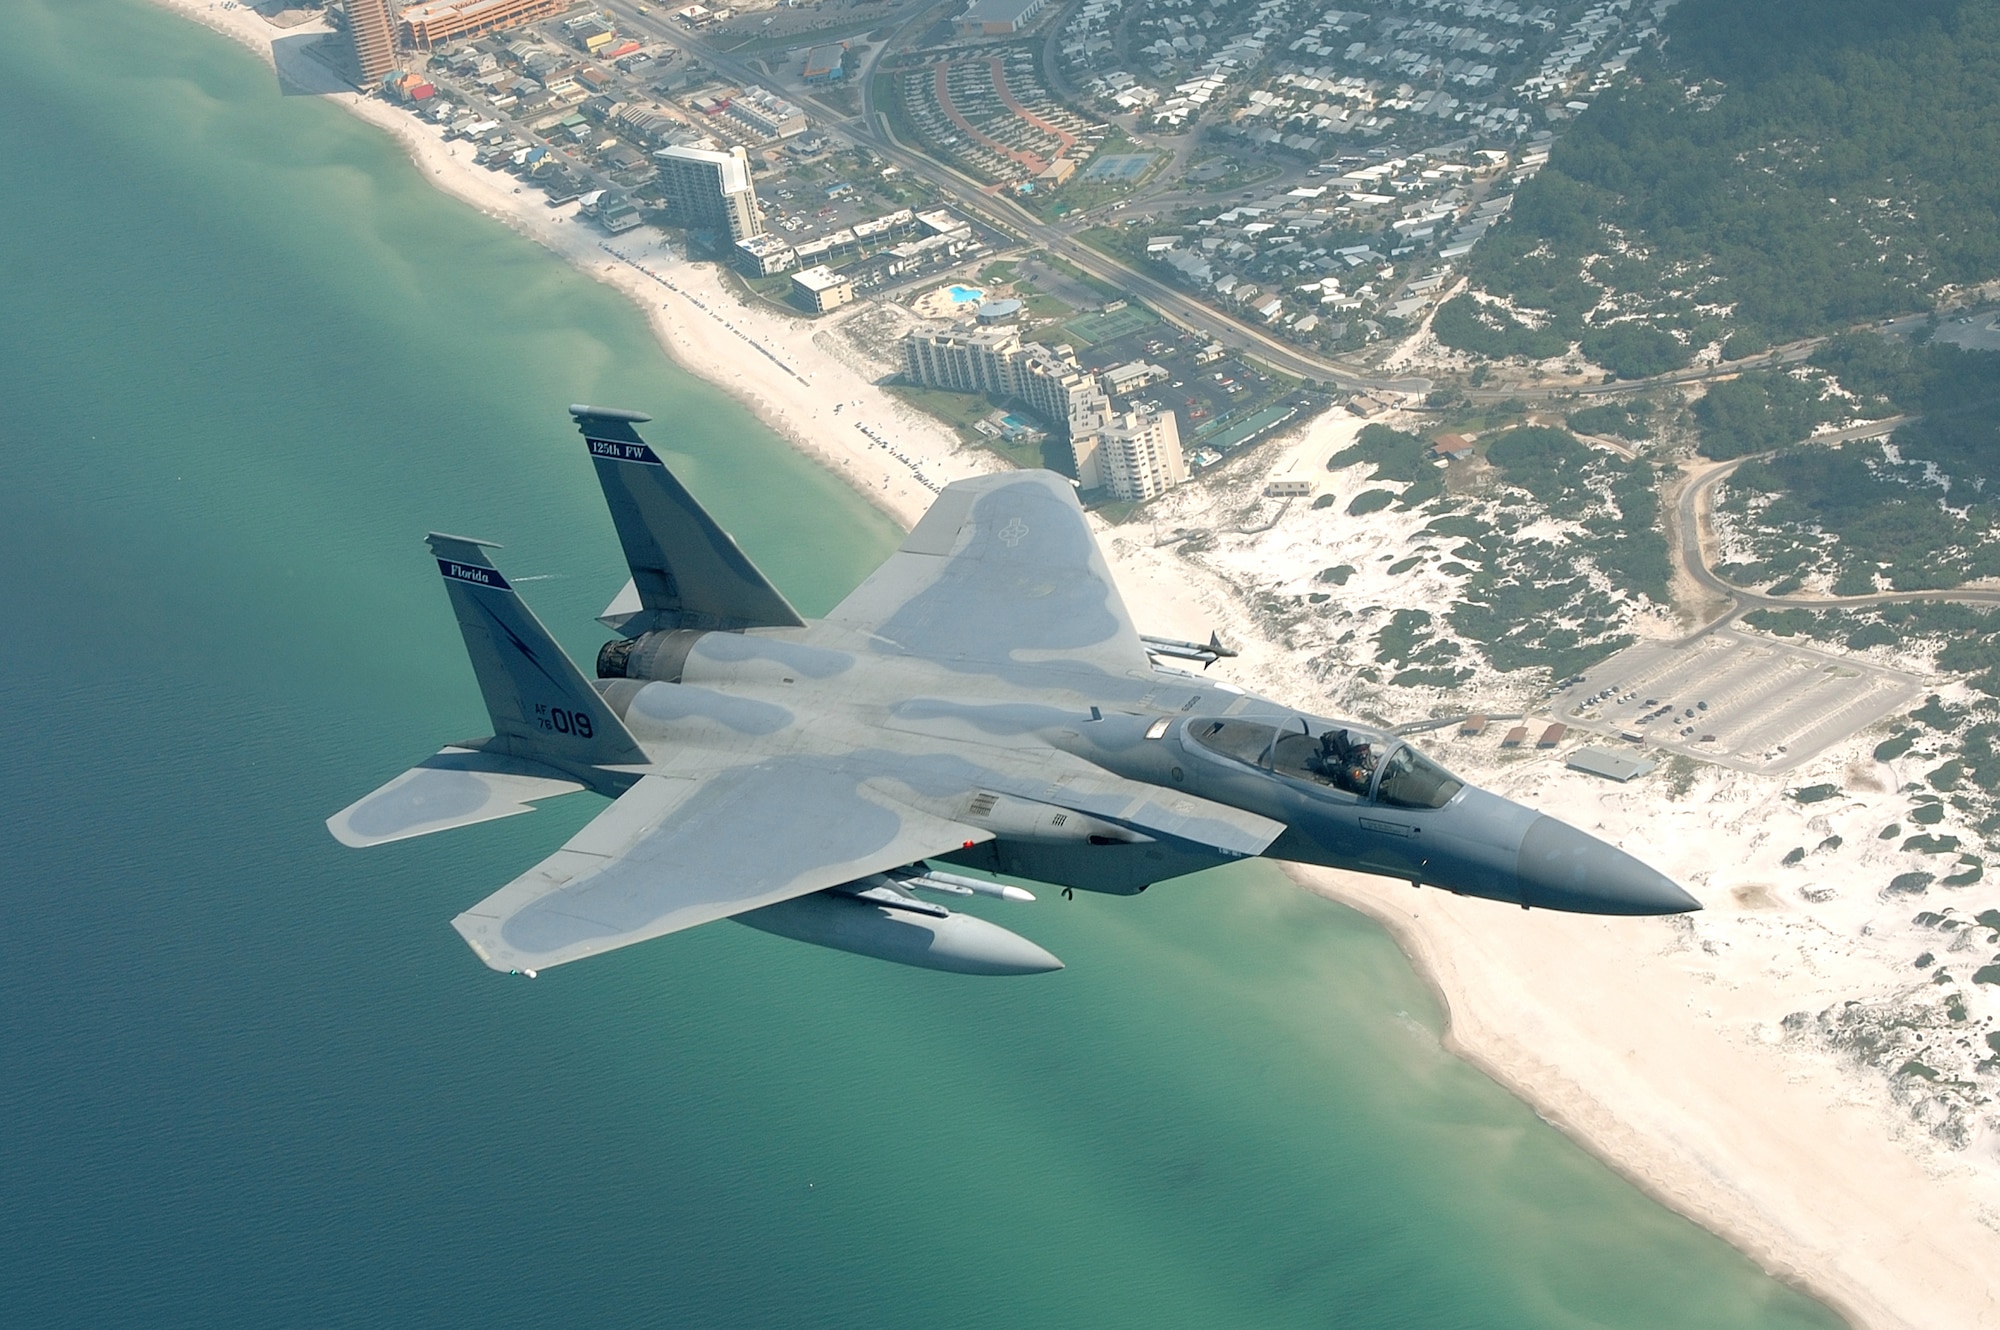 OVER PANAMA CITY, Fla. -- An F-15 Eagle flys over the  beach on approach to Tyndall Air Force Base, Fla., after a mission during a weapons systems evaluation program sortie May 19. The Eagle is assigned to the Florida Air National Guard's 125th Fighter Wing. (U.S. Air Force photo by Master Sgt. Shaun Withers)